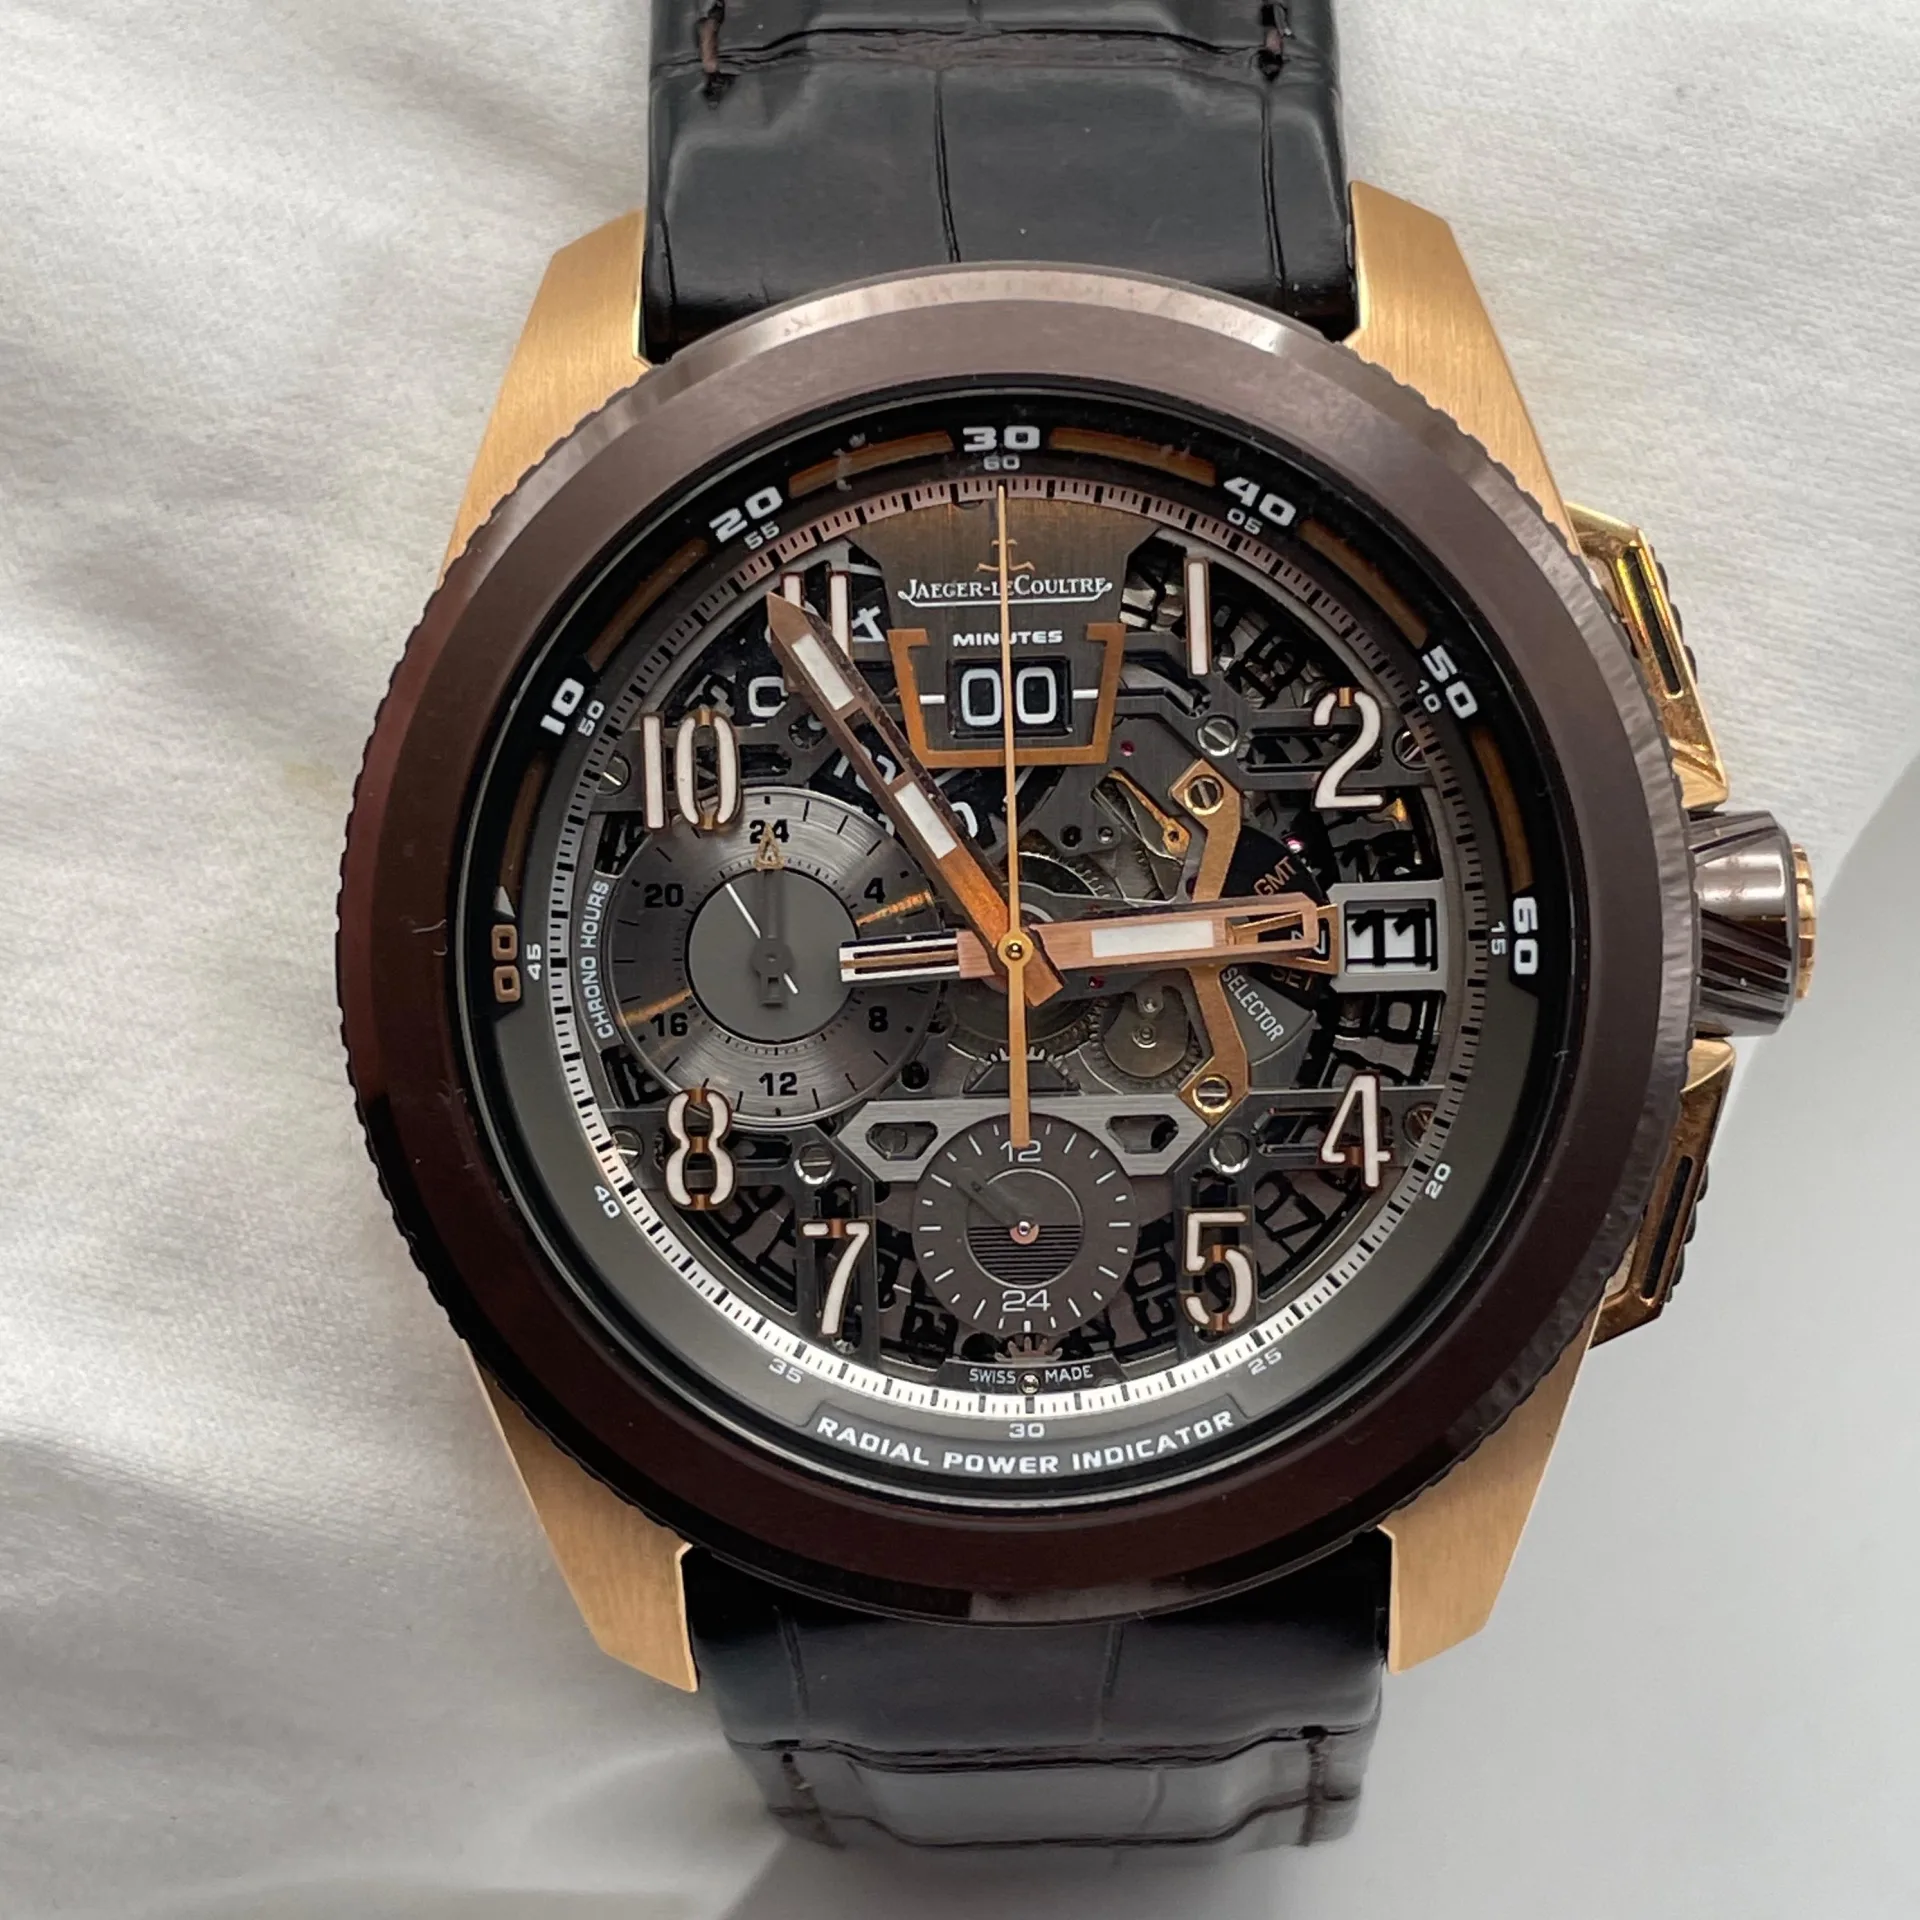 2018 Jaeger-LeCoultre Master Compressor Extreme LAB 2 Red Gold 203S540 Listing Image